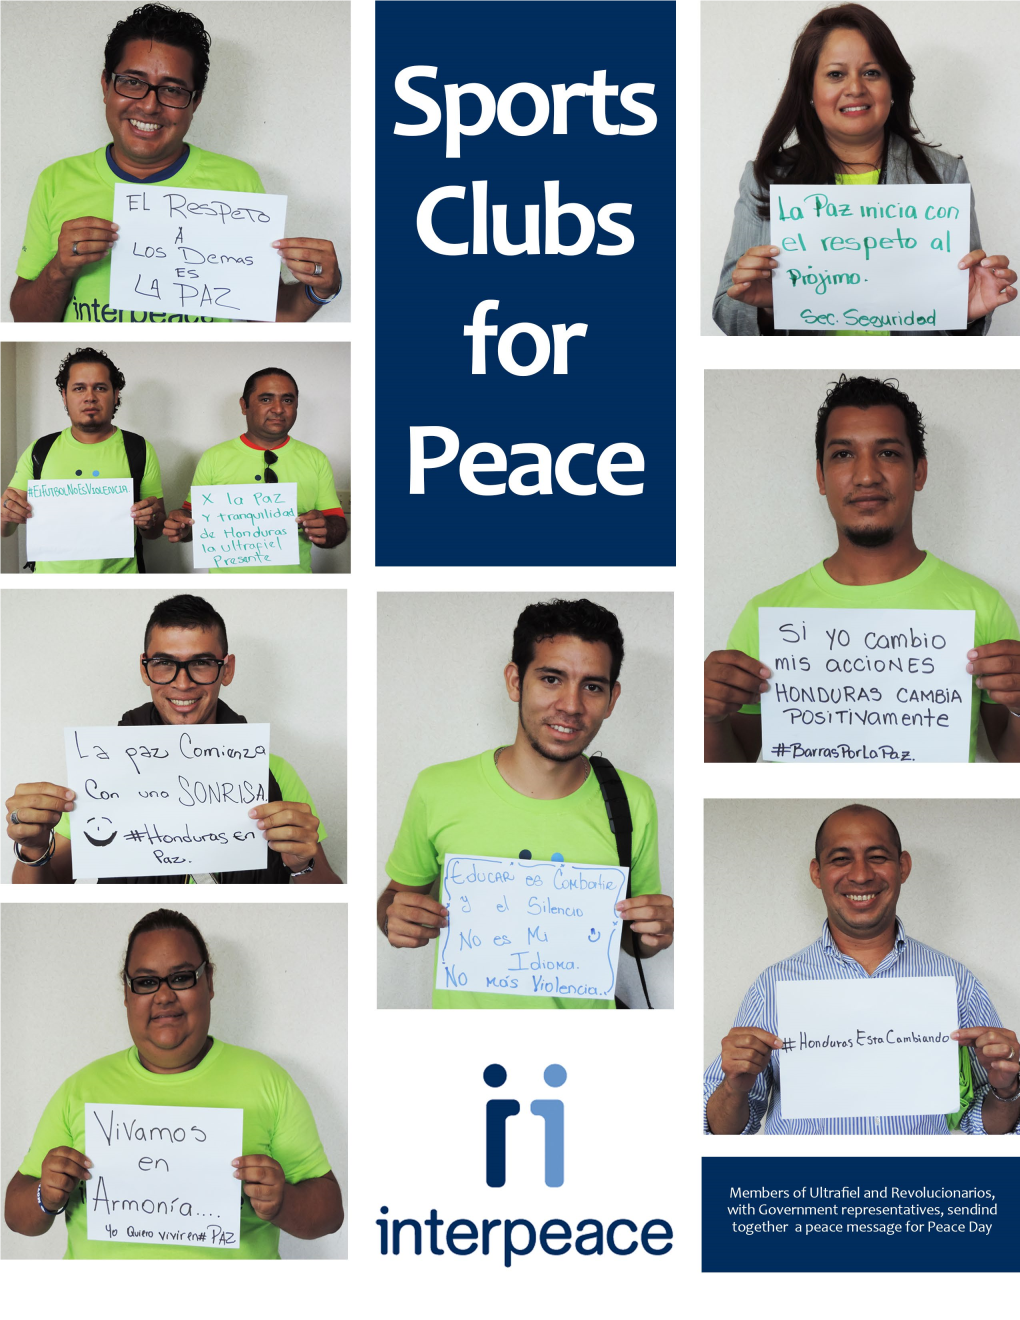 5. Sports Clubs for Peace: an Effort to Transform